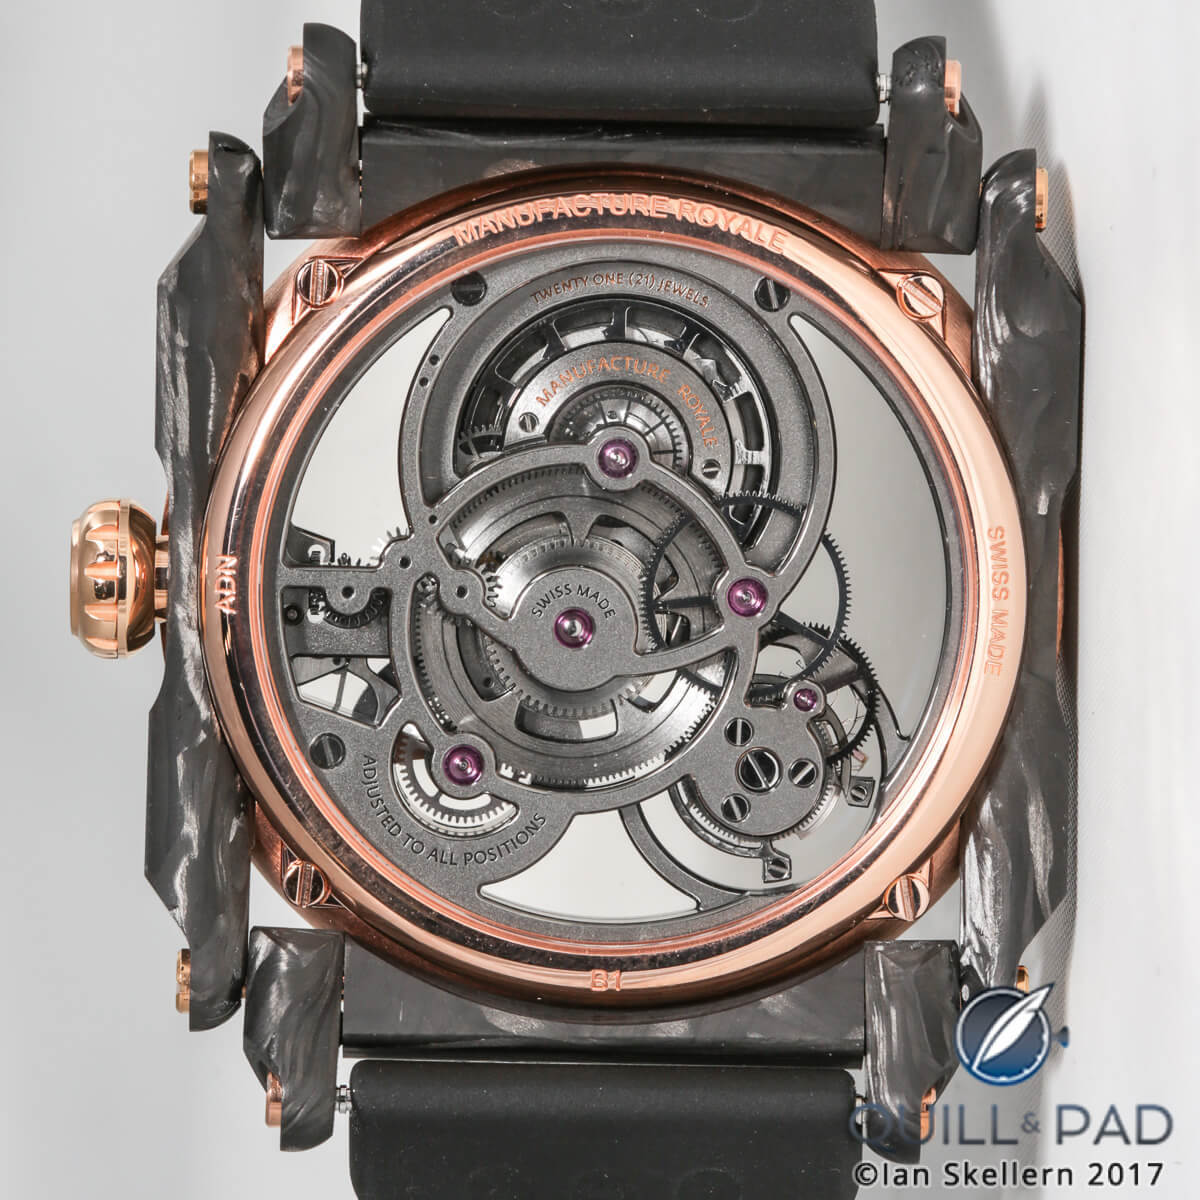 View through the display back of the pink gold Manufacture Royale ADN